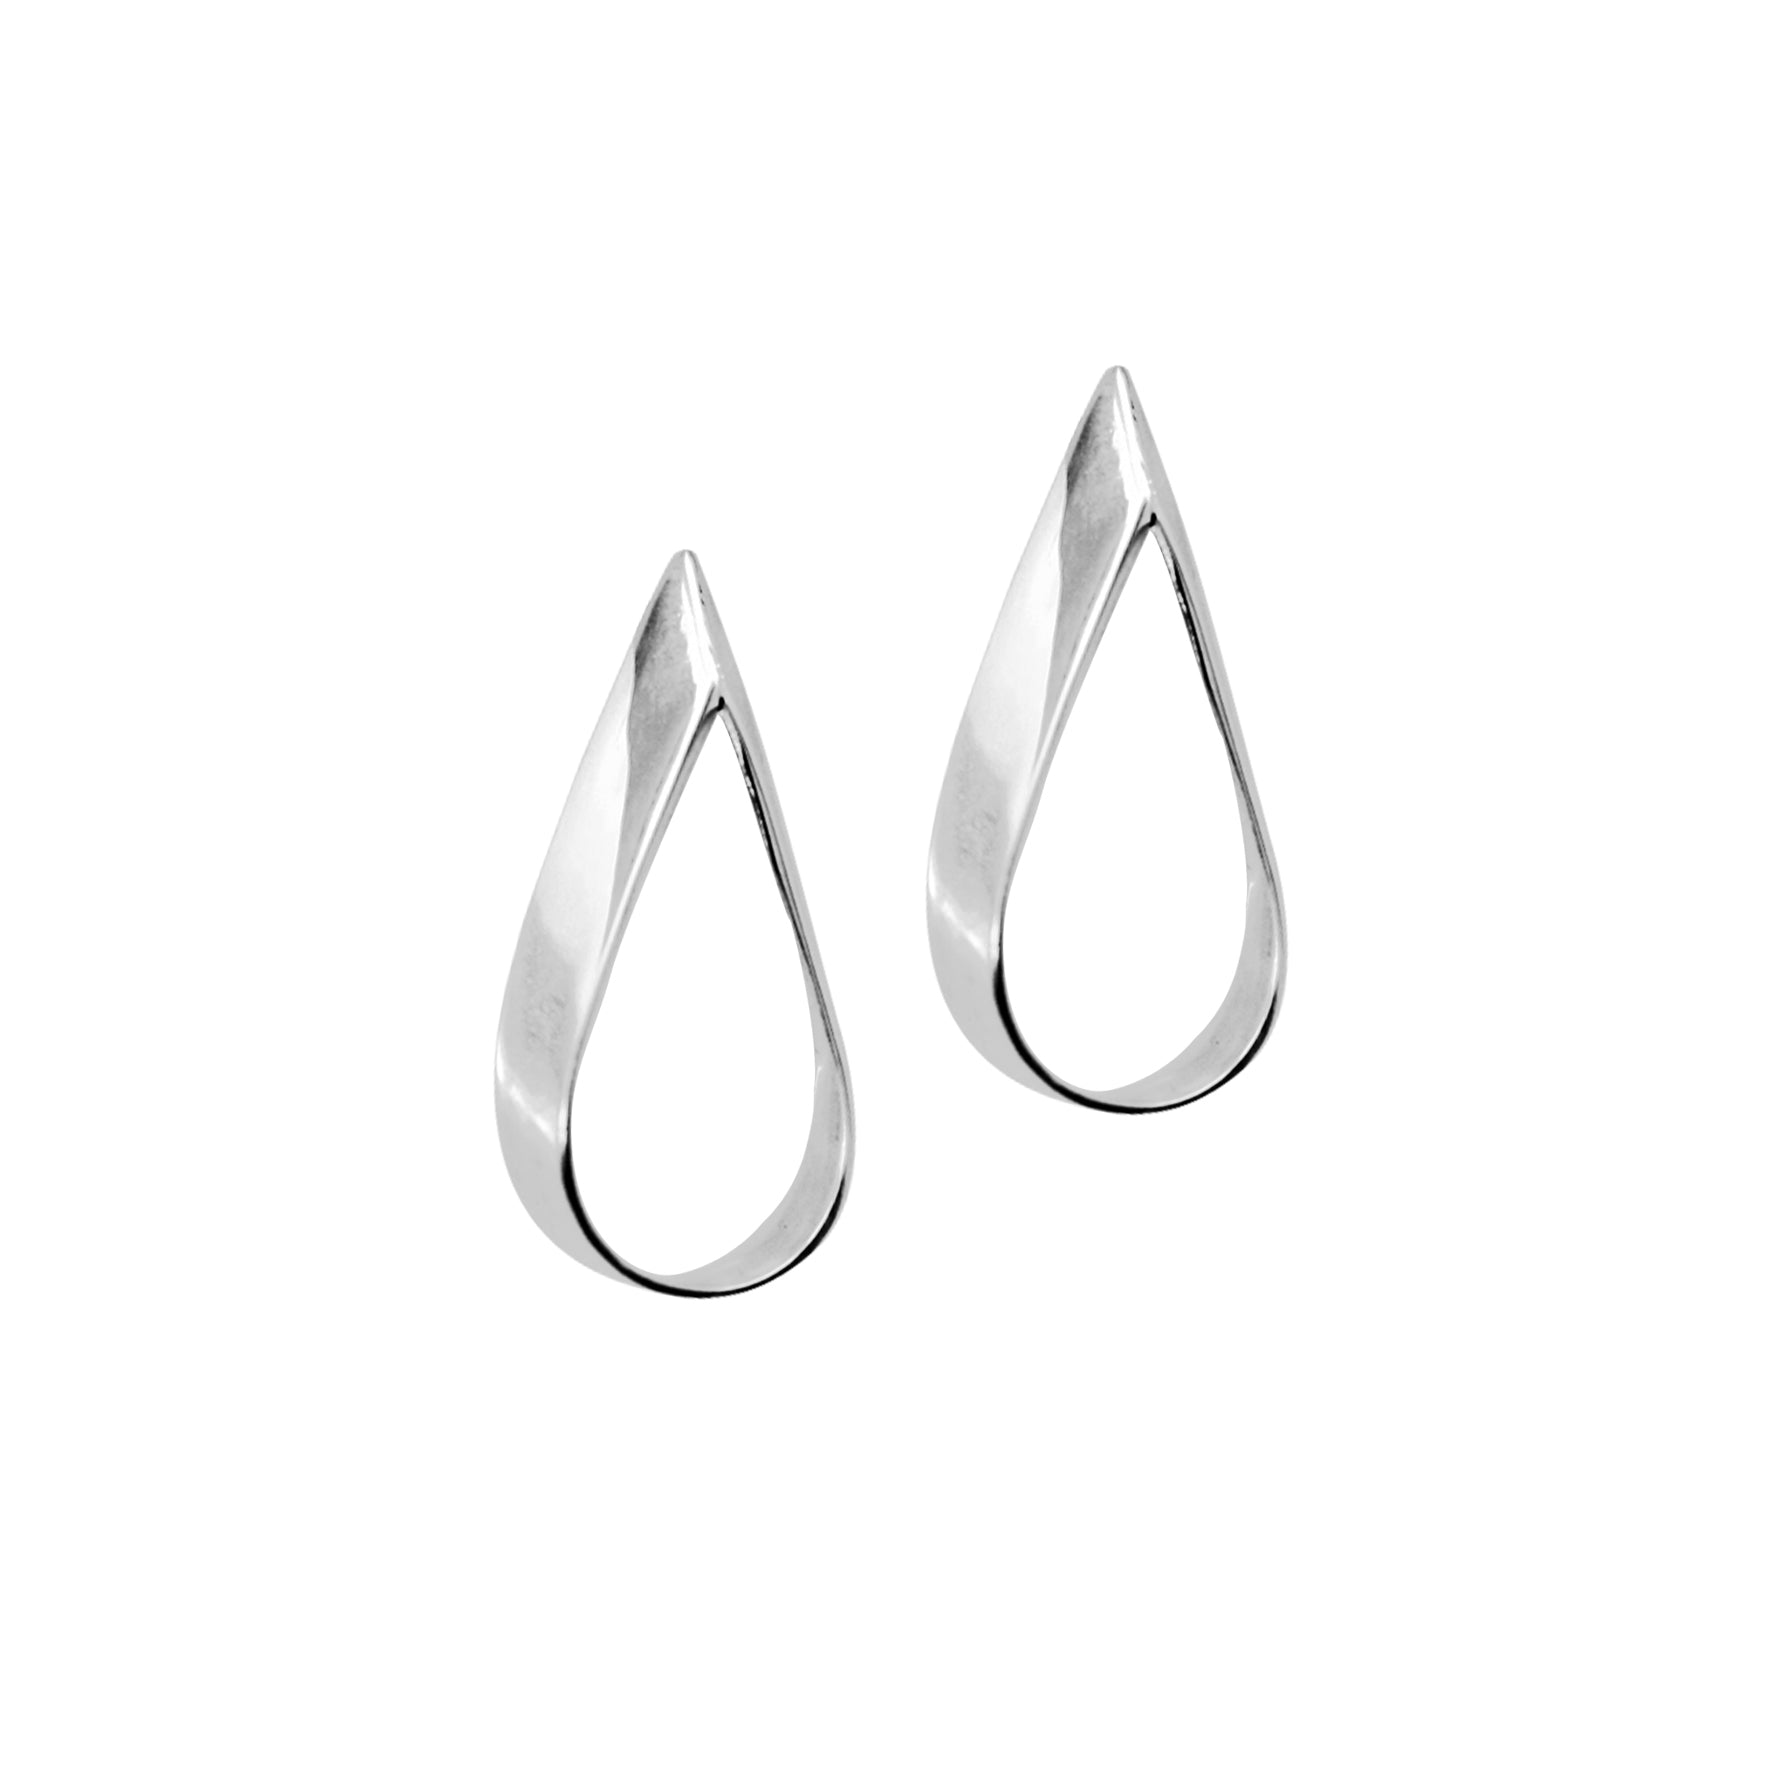 Claire-hollow-teardrop-silver-earrings-by-Marie-Beatrice-Gade-flat-lay